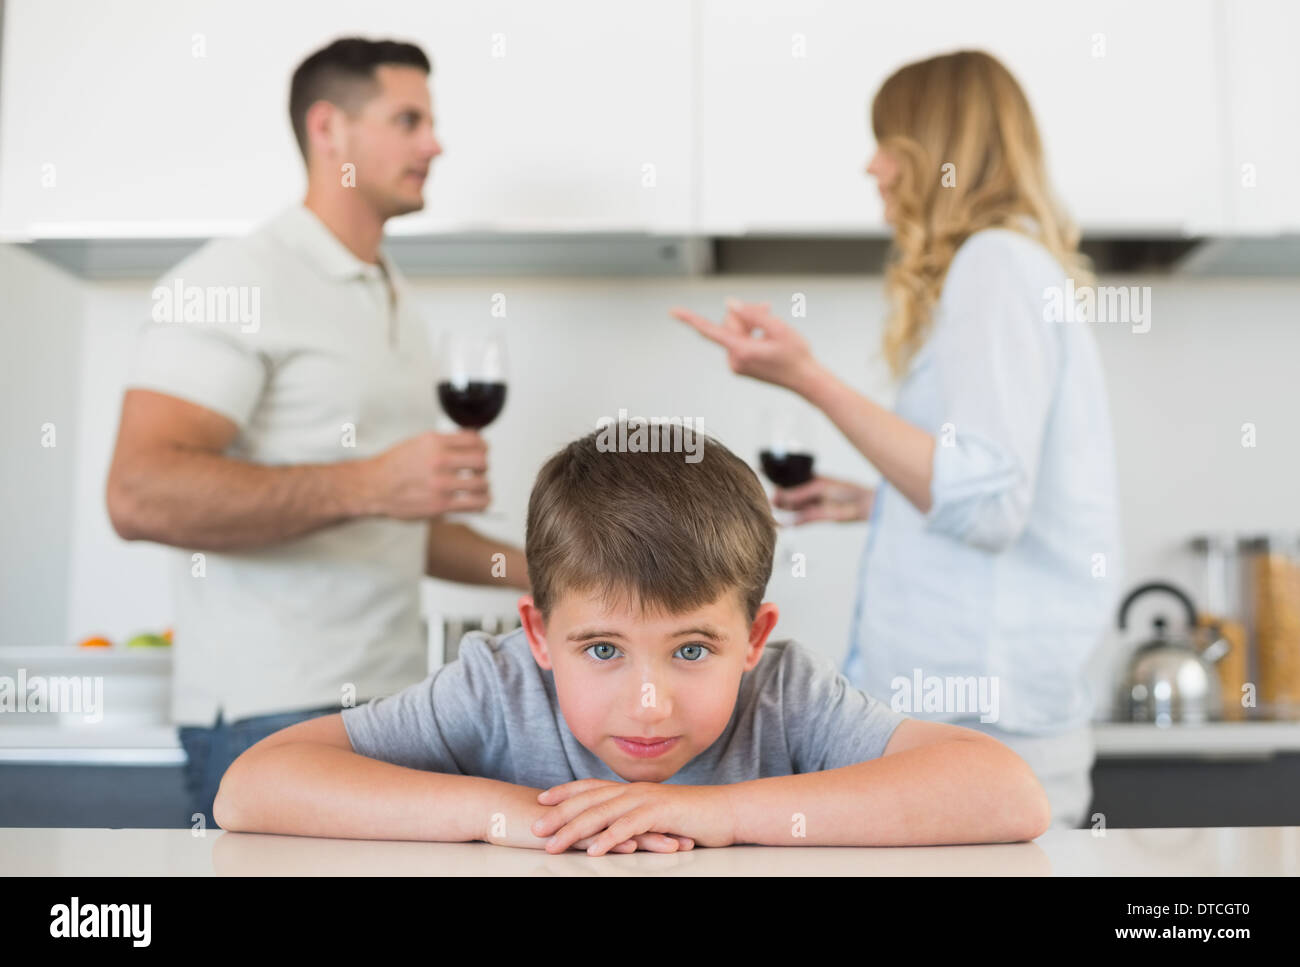 Sad boy leaning on table while parents arguing Stock Photo